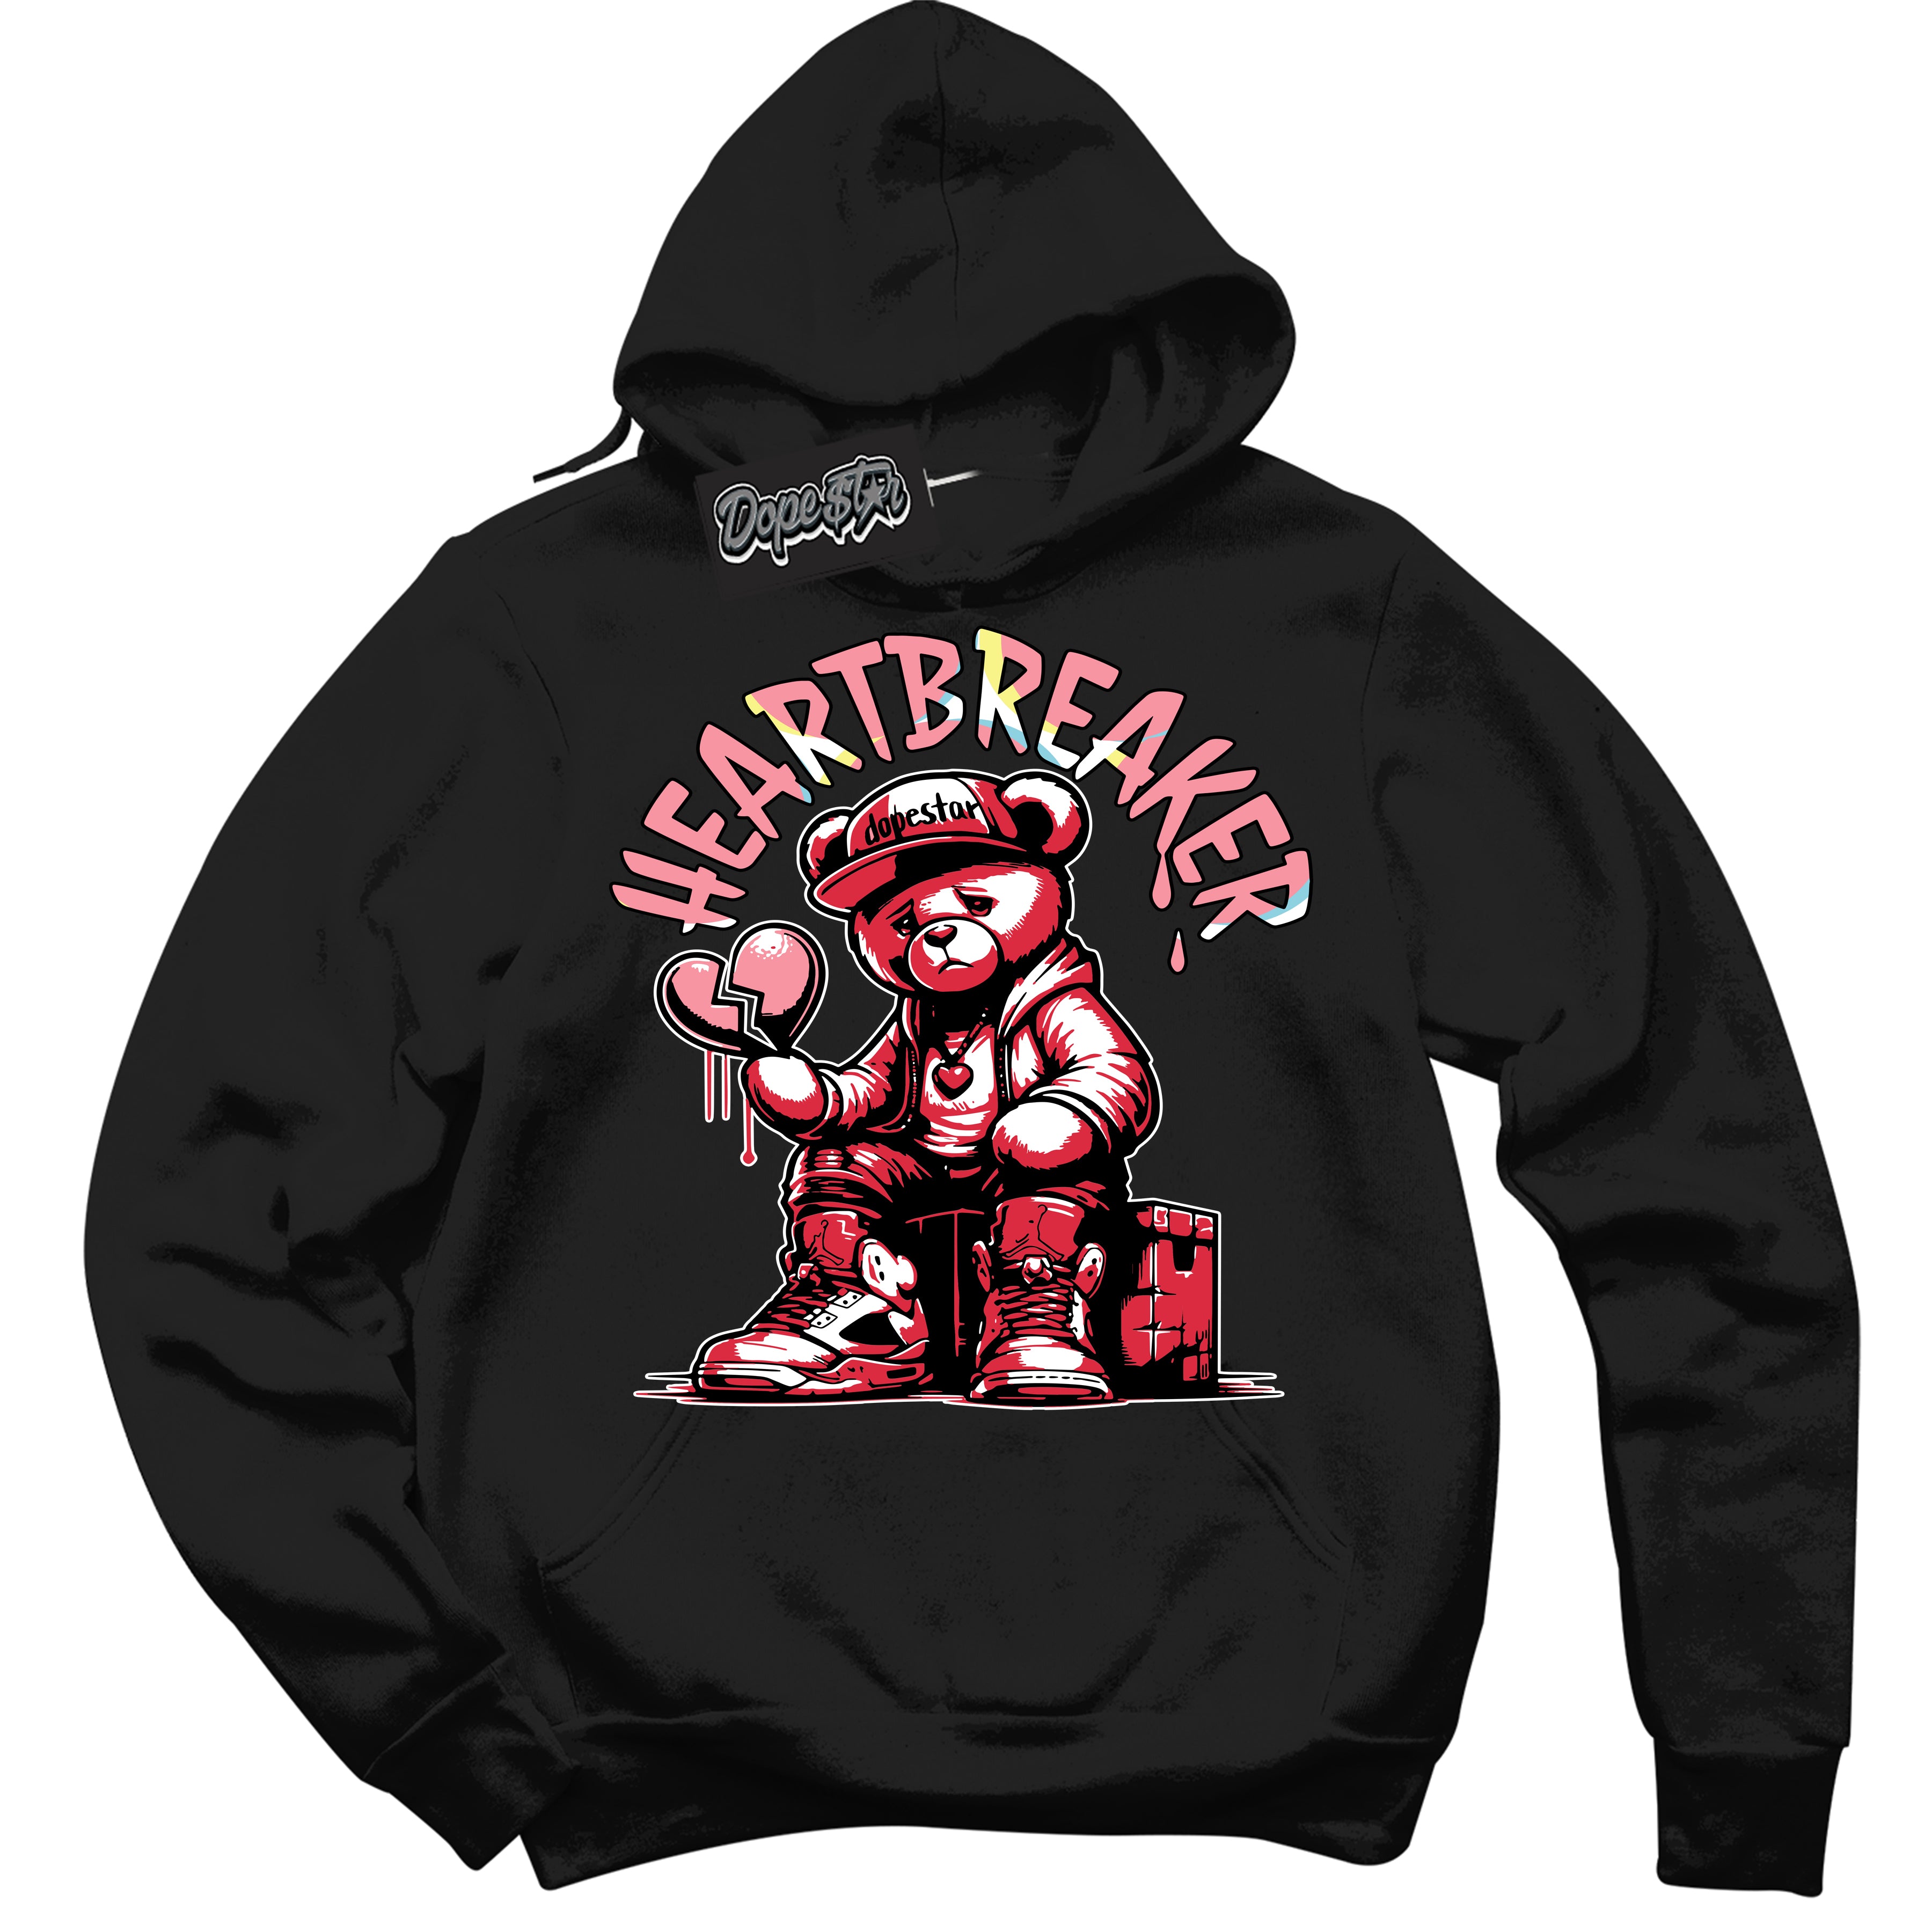 Cool Black Graphic DopeStar Hoodie with “ Heartbreaker Bear “ print, that perfectly matches Spider-Verse 1s sneakers